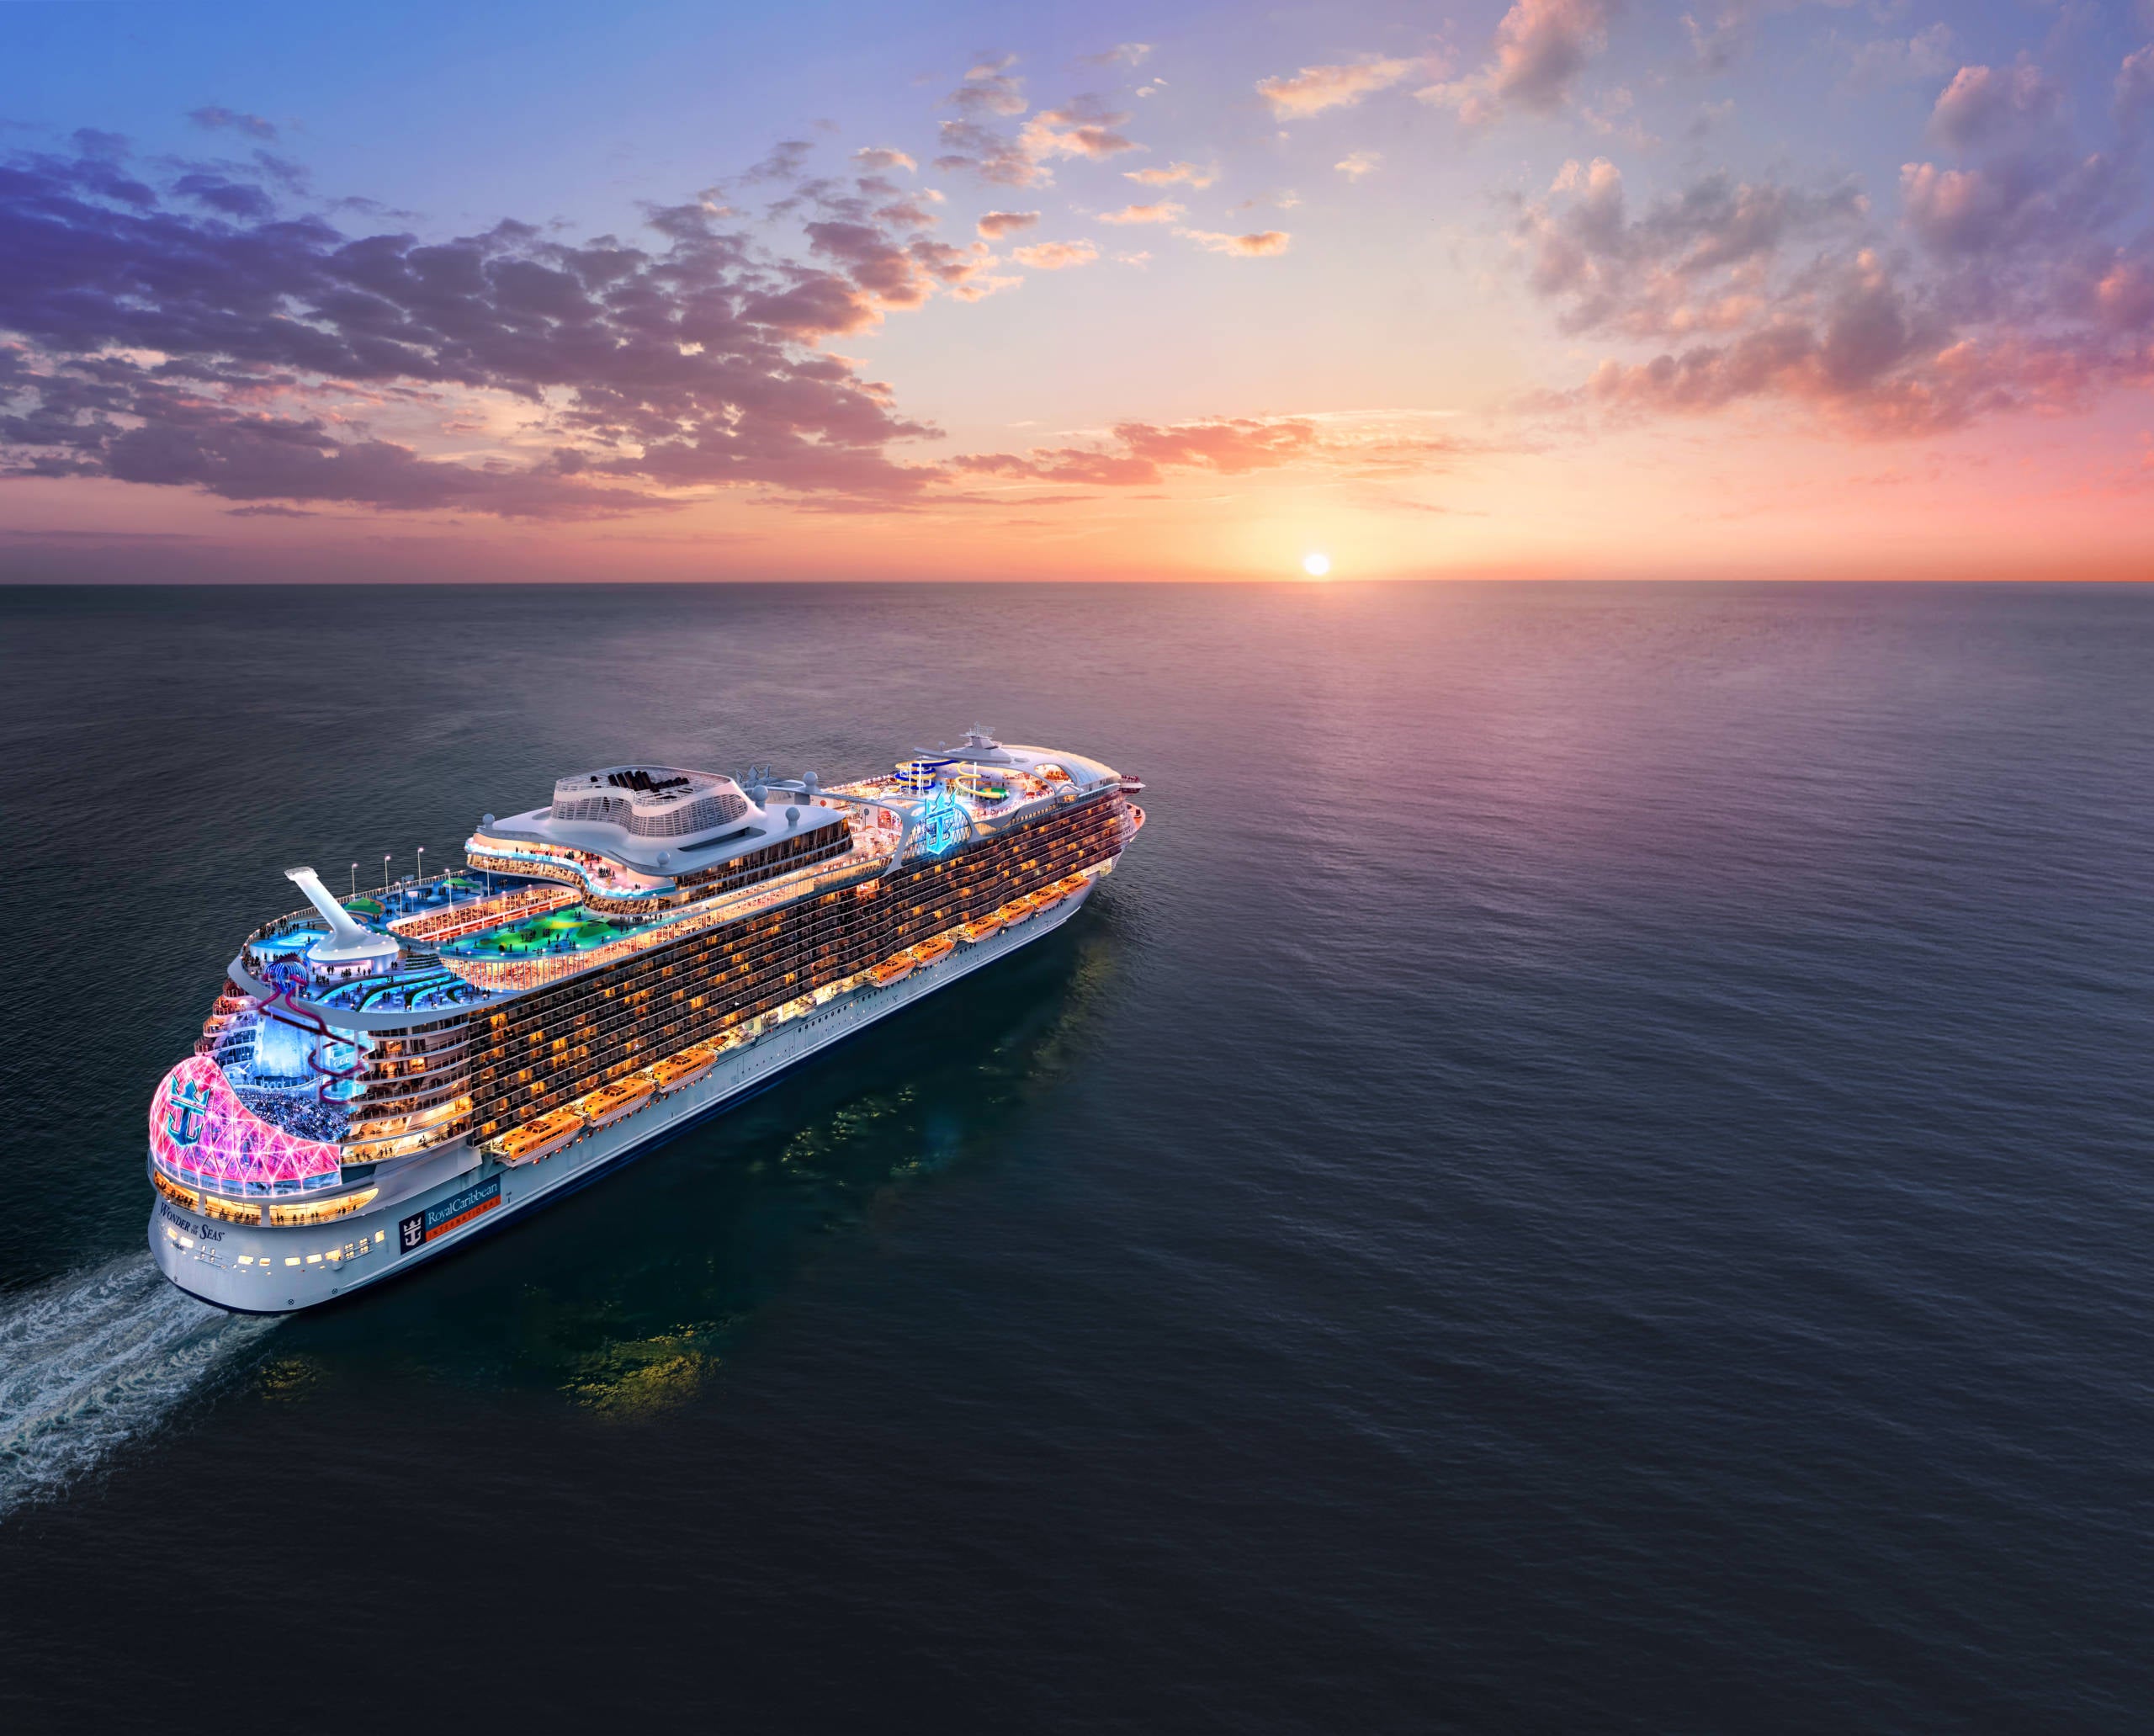 The Top Royal Caribbean Cruise Ships for an Unforgettable Vacation Experience